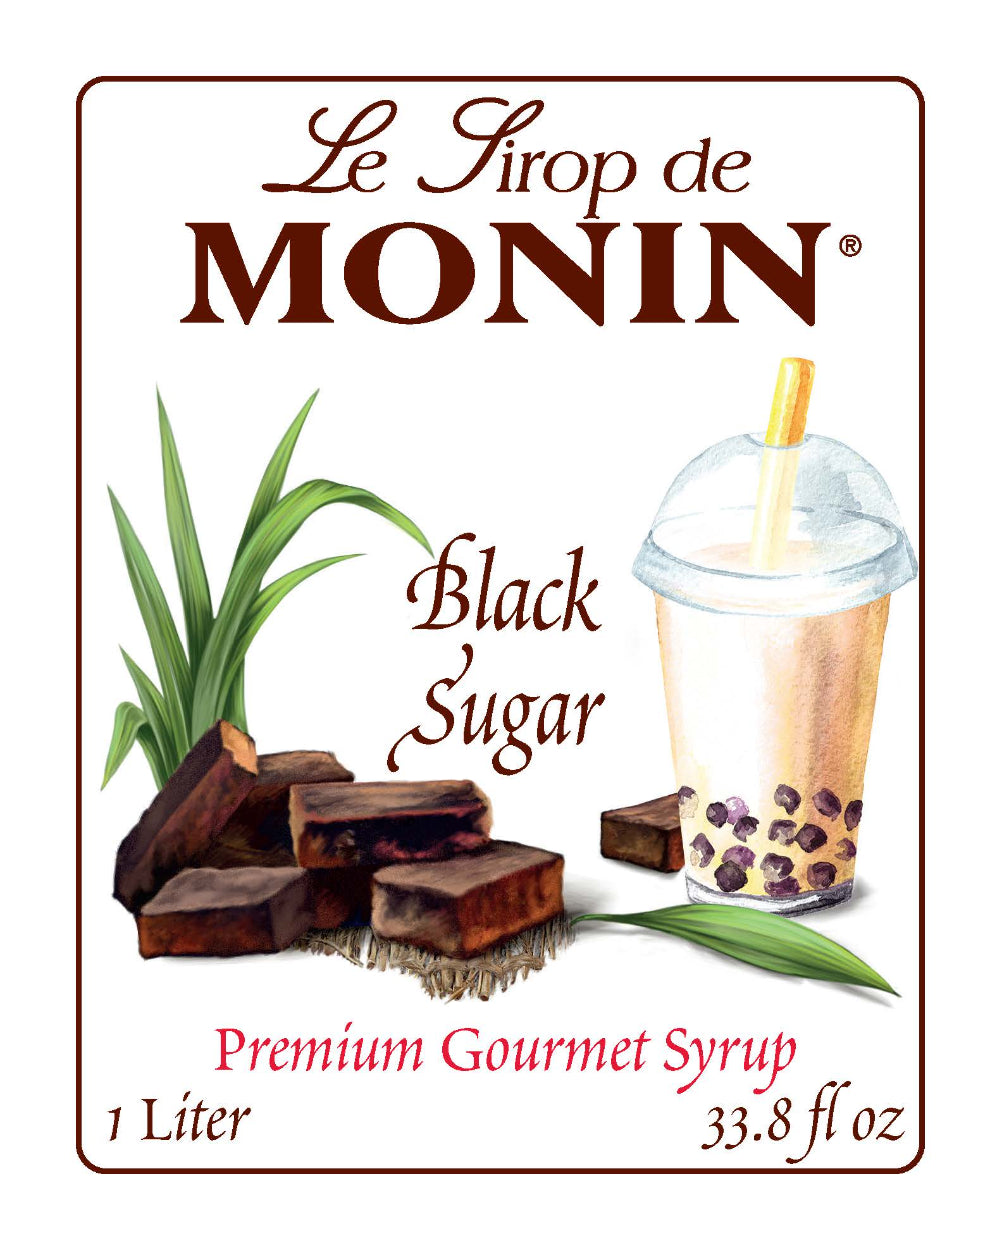 case of Black Sugar Syrup - Monin - Premium Syrups and Flavourings - 4 x 1 L per case